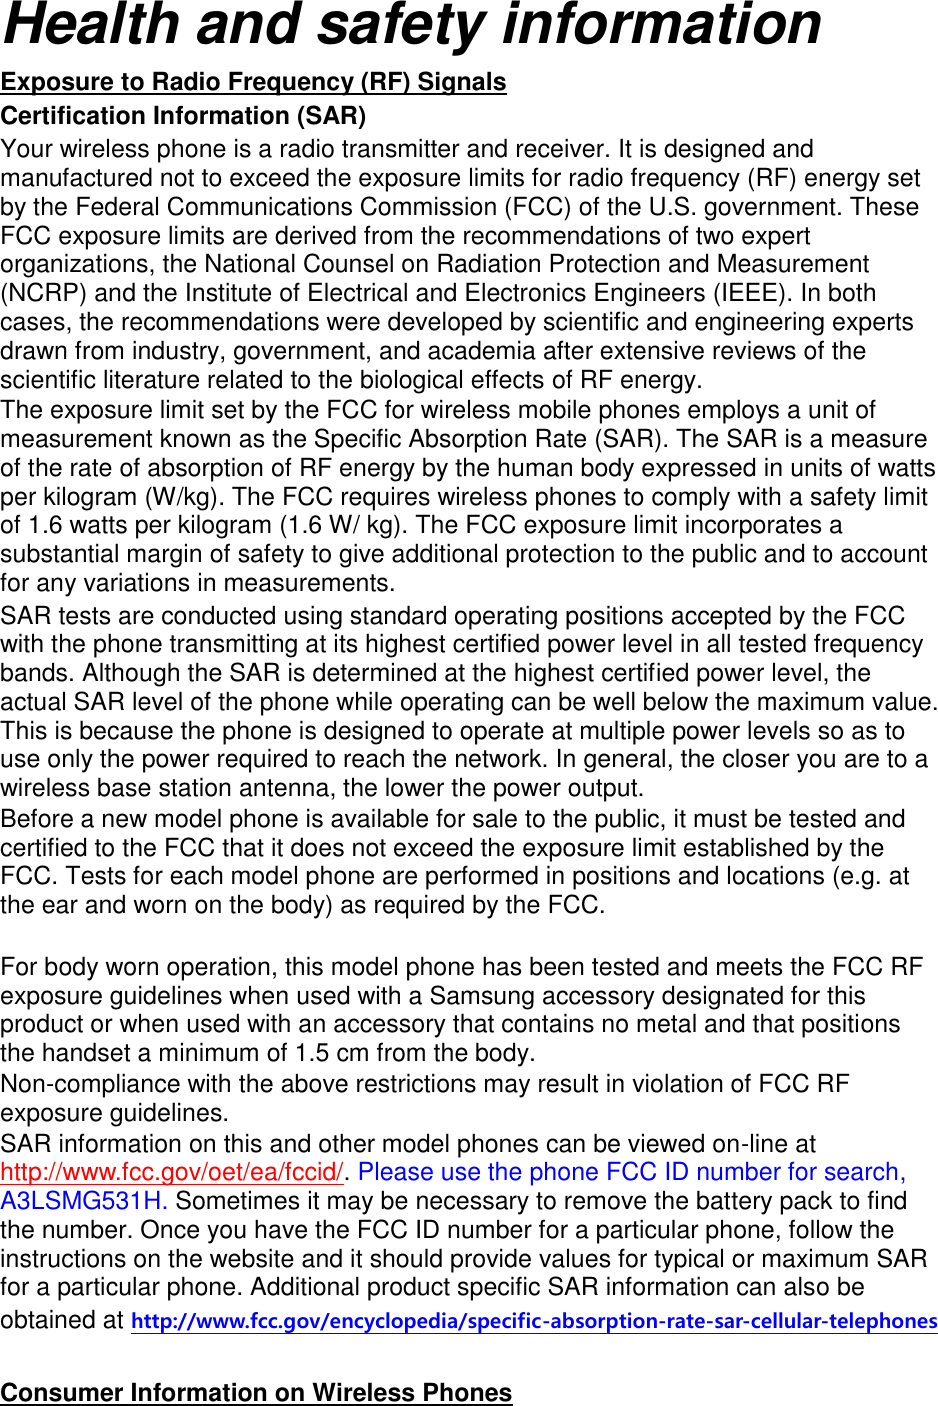 Health and safety information Exposure to Radio Frequency (RF) Signals Certification Information (SAR) Your wireless phone is a radio transmitter and receiver. It is designed and manufactured not to exceed the exposure limits for radio frequency (RF) energy set by the Federal Communications Commission (FCC) of the U.S. government. These FCC exposure limits are derived from the recommendations of two expert organizations, the National Counsel on Radiation Protection and Measurement (NCRP) and the Institute of Electrical and Electronics Engineers (IEEE). In both cases, the recommendations were developed by scientific and engineering experts drawn from industry, government, and academia after extensive reviews of the scientific literature related to the biological effects of RF energy. The exposure limit set by the FCC for wireless mobile phones employs a unit of measurement known as the Specific Absorption Rate (SAR). The SAR is a measure of the rate of absorption of RF energy by the human body expressed in units of watts per kilogram (W/kg). The FCC requires wireless phones to comply with a safety limit of 1.6 watts per kilogram (1.6 W/ kg). The FCC exposure limit incorporates a substantial margin of safety to give additional protection to the public and to account for any variations in measurements. SAR tests are conducted using standard operating positions accepted by the FCC with the phone transmitting at its highest certified power level in all tested frequency bands. Although the SAR is determined at the highest certified power level, the actual SAR level of the phone while operating can be well below the maximum value. This is because the phone is designed to operate at multiple power levels so as to use only the power required to reach the network. In general, the closer you are to a wireless base station antenna, the lower the power output. Before a new model phone is available for sale to the public, it must be tested and certified to the FCC that it does not exceed the exposure limit established by the FCC. Tests for each model phone are performed in positions and locations (e.g. at the ear and worn on the body) as required by the FCC.      For body worn operation, this model phone has been tested and meets the FCC RF exposure guidelines when used with a Samsung accessory designated for this product or when used with an accessory that contains no metal and that positions the handset a minimum of 1.5 cm from the body.   Non-compliance with the above restrictions may result in violation of FCC RF exposure guidelines. SAR information on this and other model phones can be viewed on-line at http://www.fcc.gov/oet/ea/fccid/. Please use the phone FCC ID number for search, A3LSMG531H. Sometimes it may be necessary to remove the battery pack to find the number. Once you have the FCC ID number for a particular phone, follow the instructions on the website and it should provide values for typical or maximum SAR for a particular phone. Additional product specific SAR information can also be obtained at http://www.fcc.gov/encyclopedia/specific-absorption-rate-sar-cellular-telephones  Consumer Information on Wireless Phones 